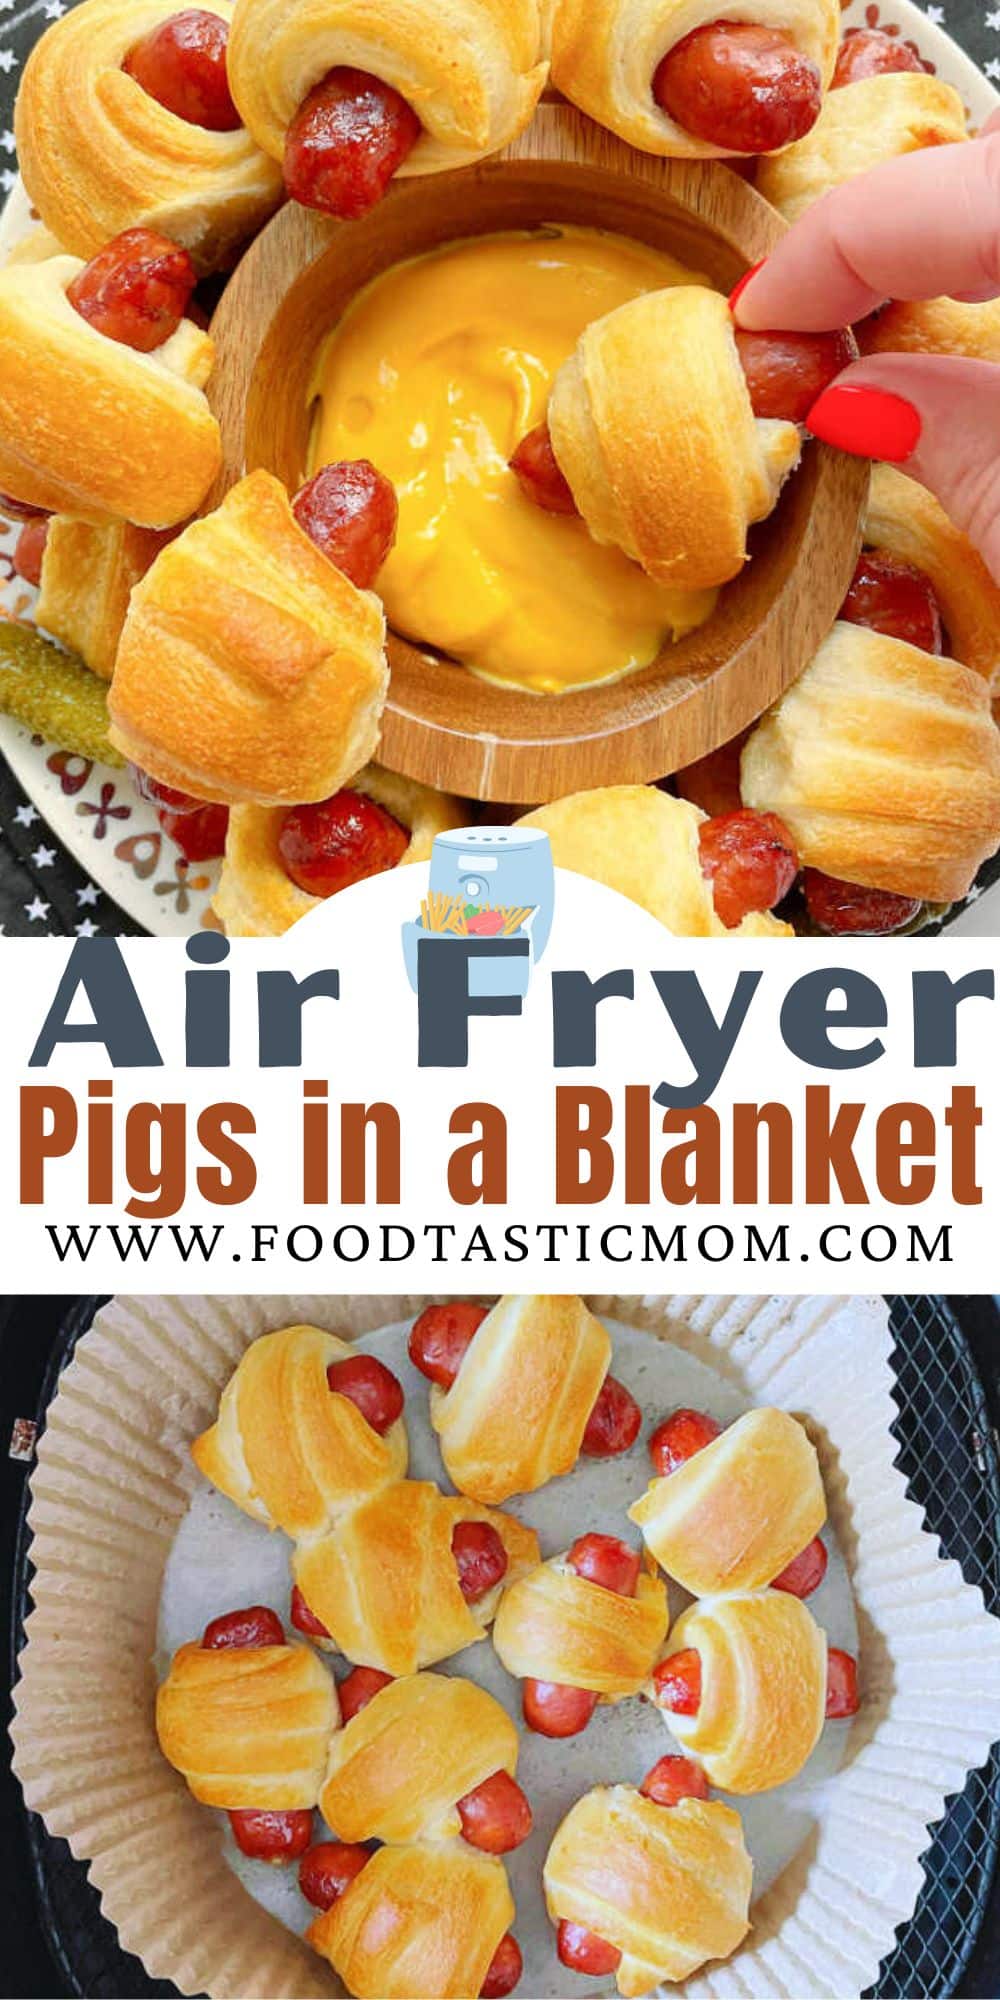 Air Fryer Pigs in a Blanket made with little smokies and crescent dough are a simple snack recipe for game days or an after school snack.  via @foodtasticmom